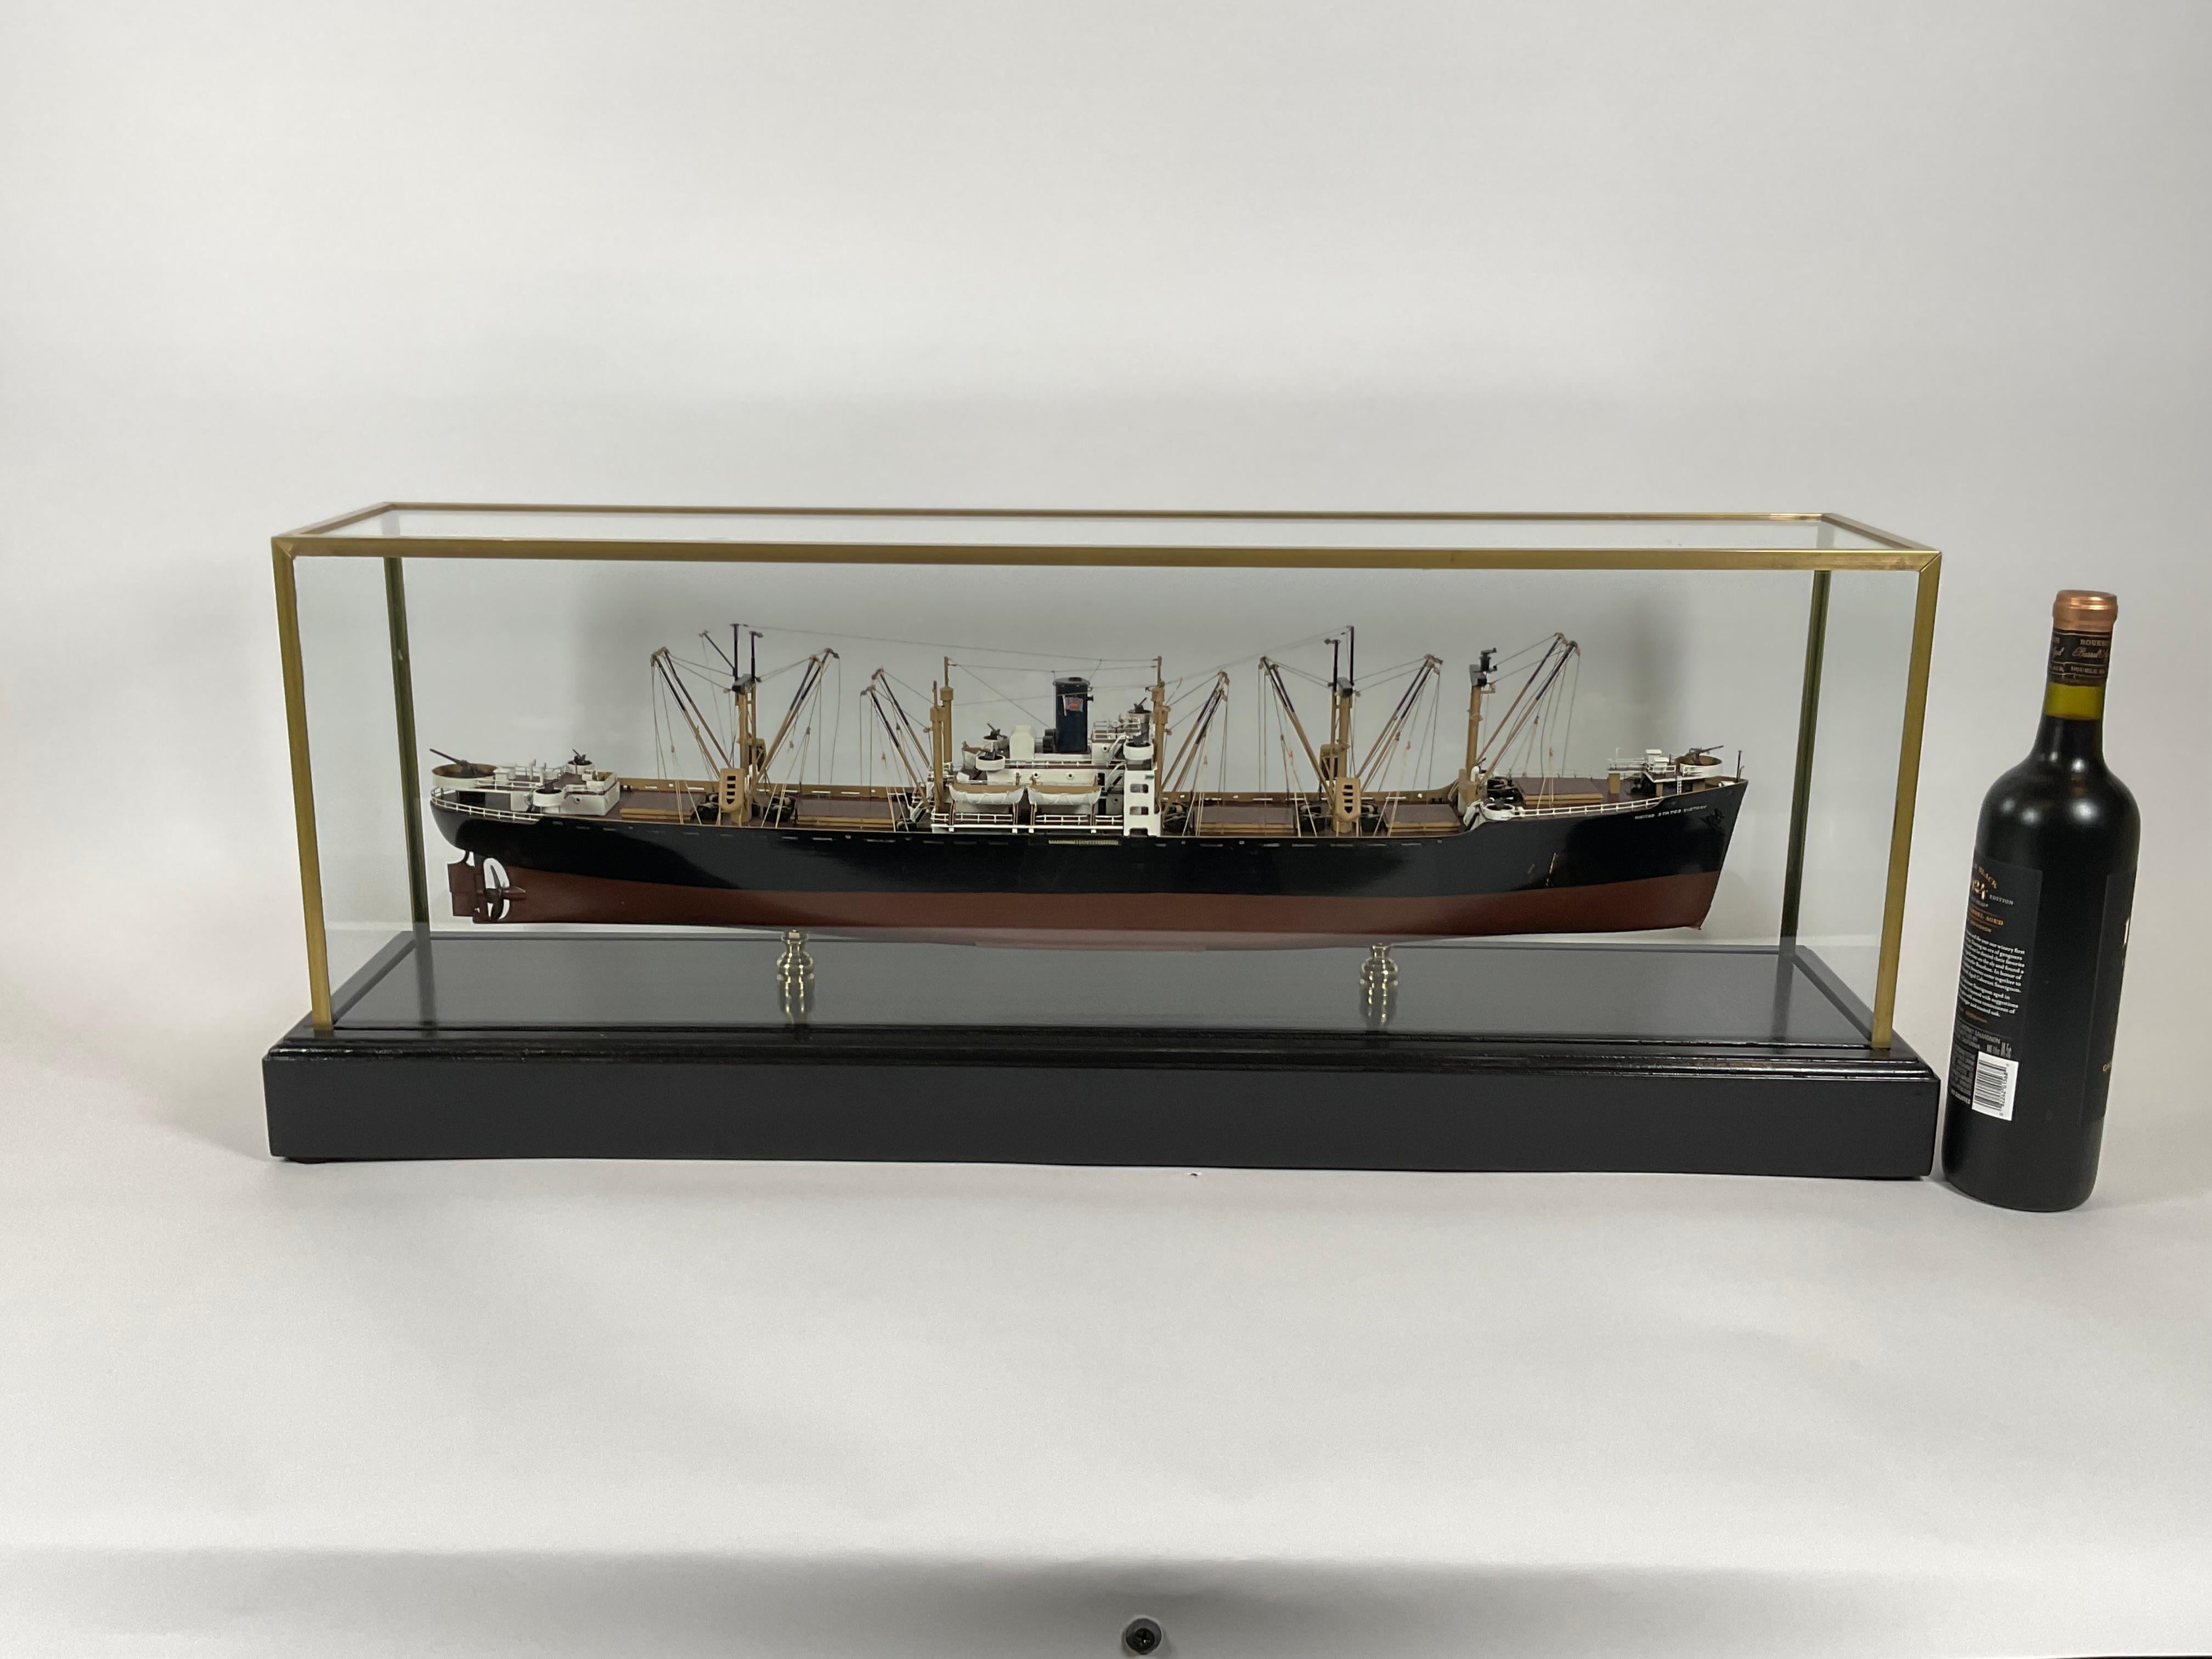 Professionally built model of the American merchant ship “United States Victory”. The model has masts, booms, hatches, super structure, bitts, cleats, rigging, etc. Mounted into a glass display case. Possibly by Van Ryper. This is a stately model